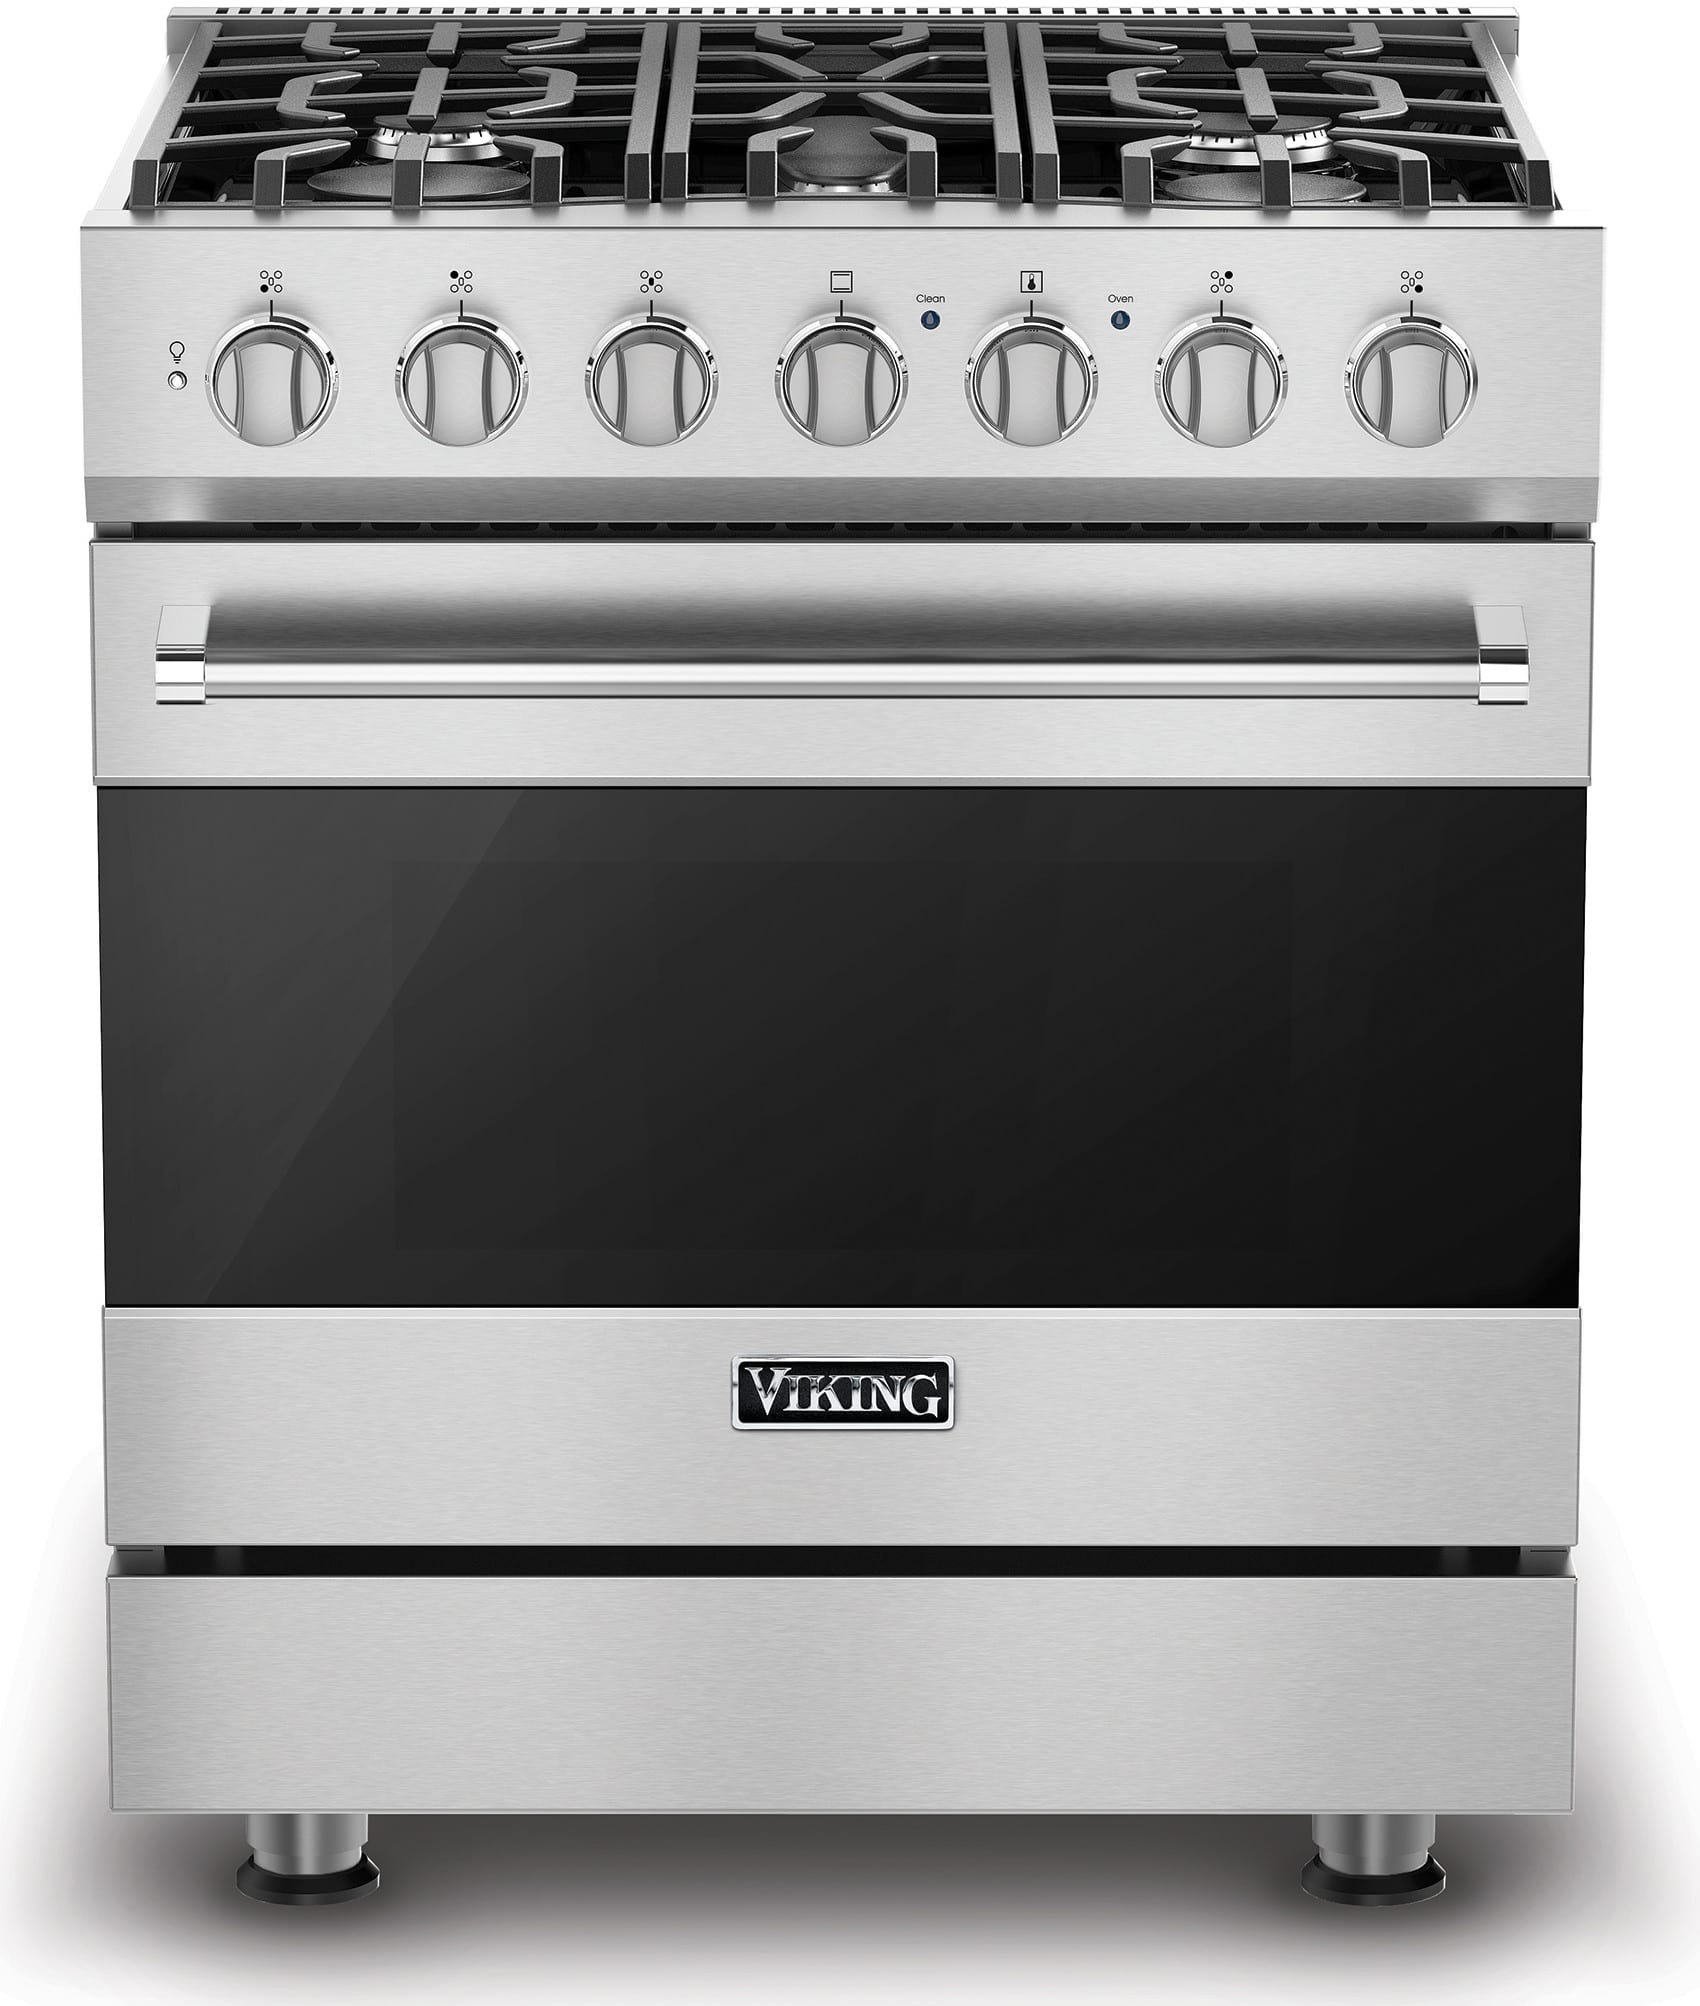 Viking RVDR33015BSS 30 Inch Freestanding Dual Fuel Range with 5 Sealed